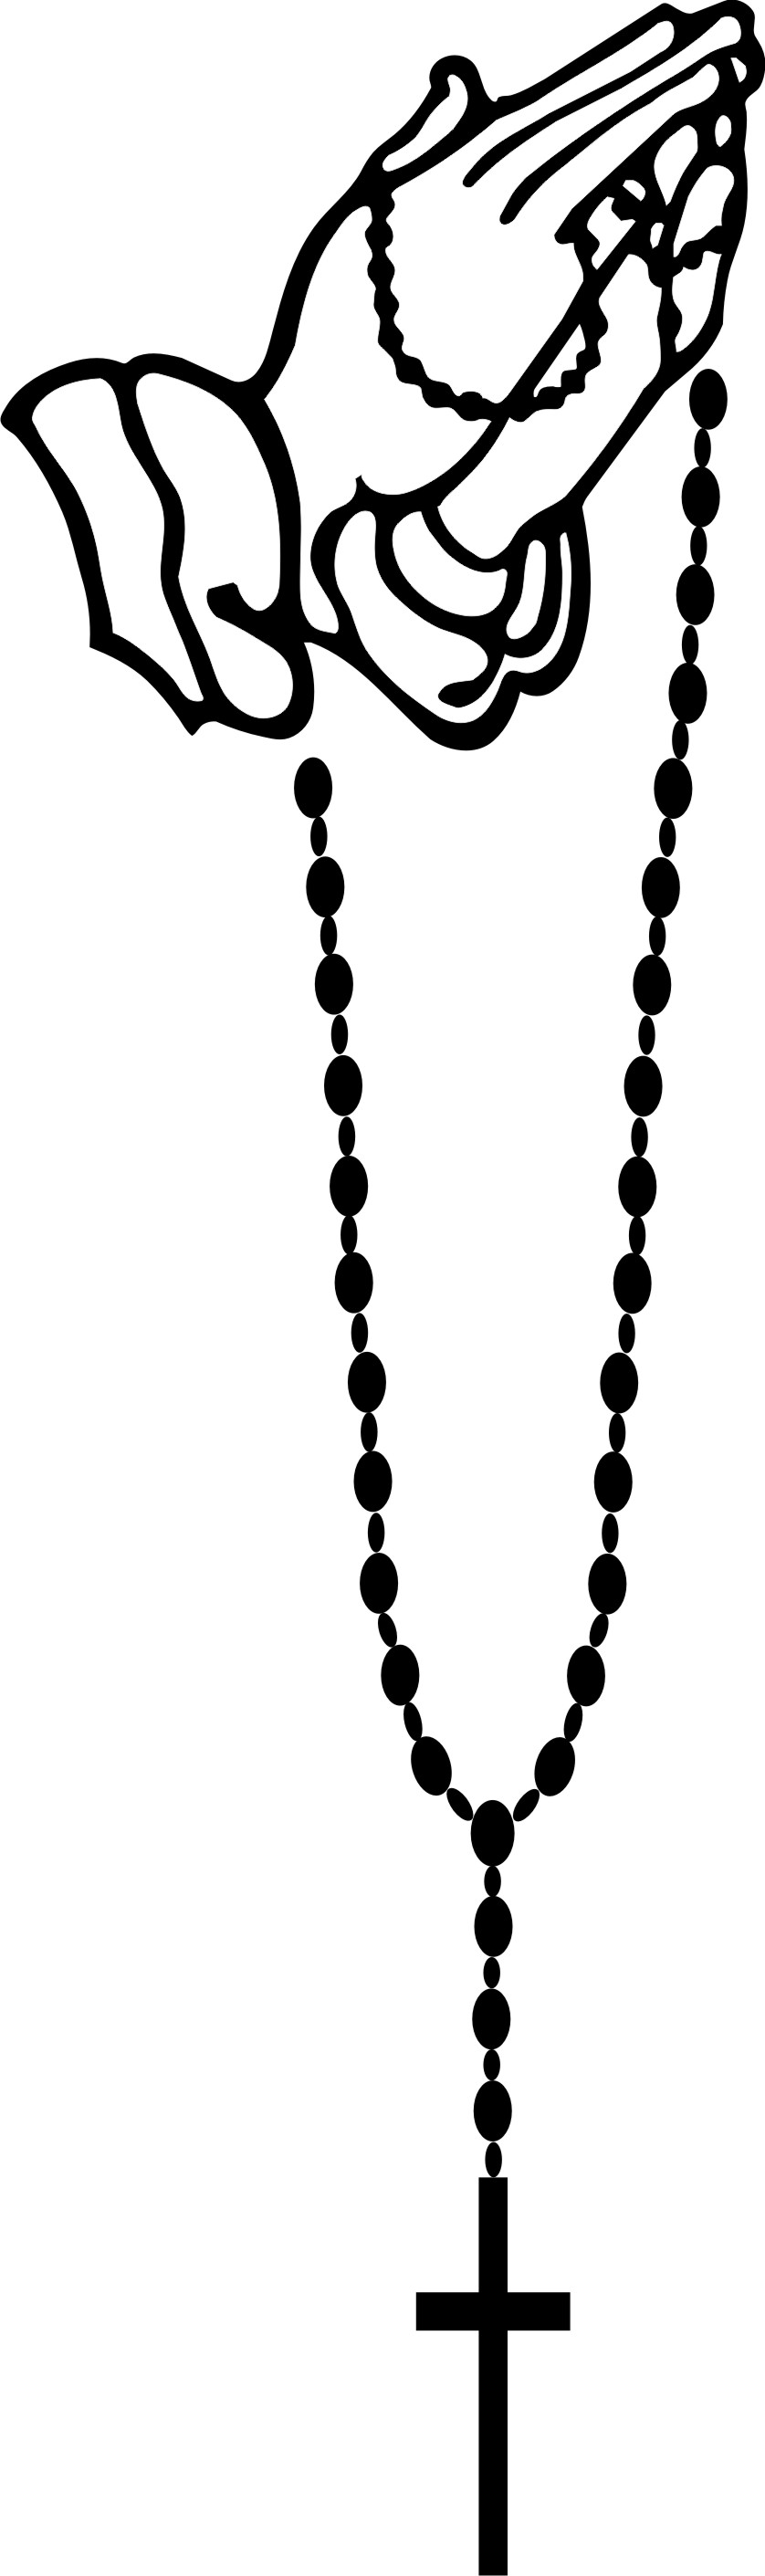 necklace clipart single bead